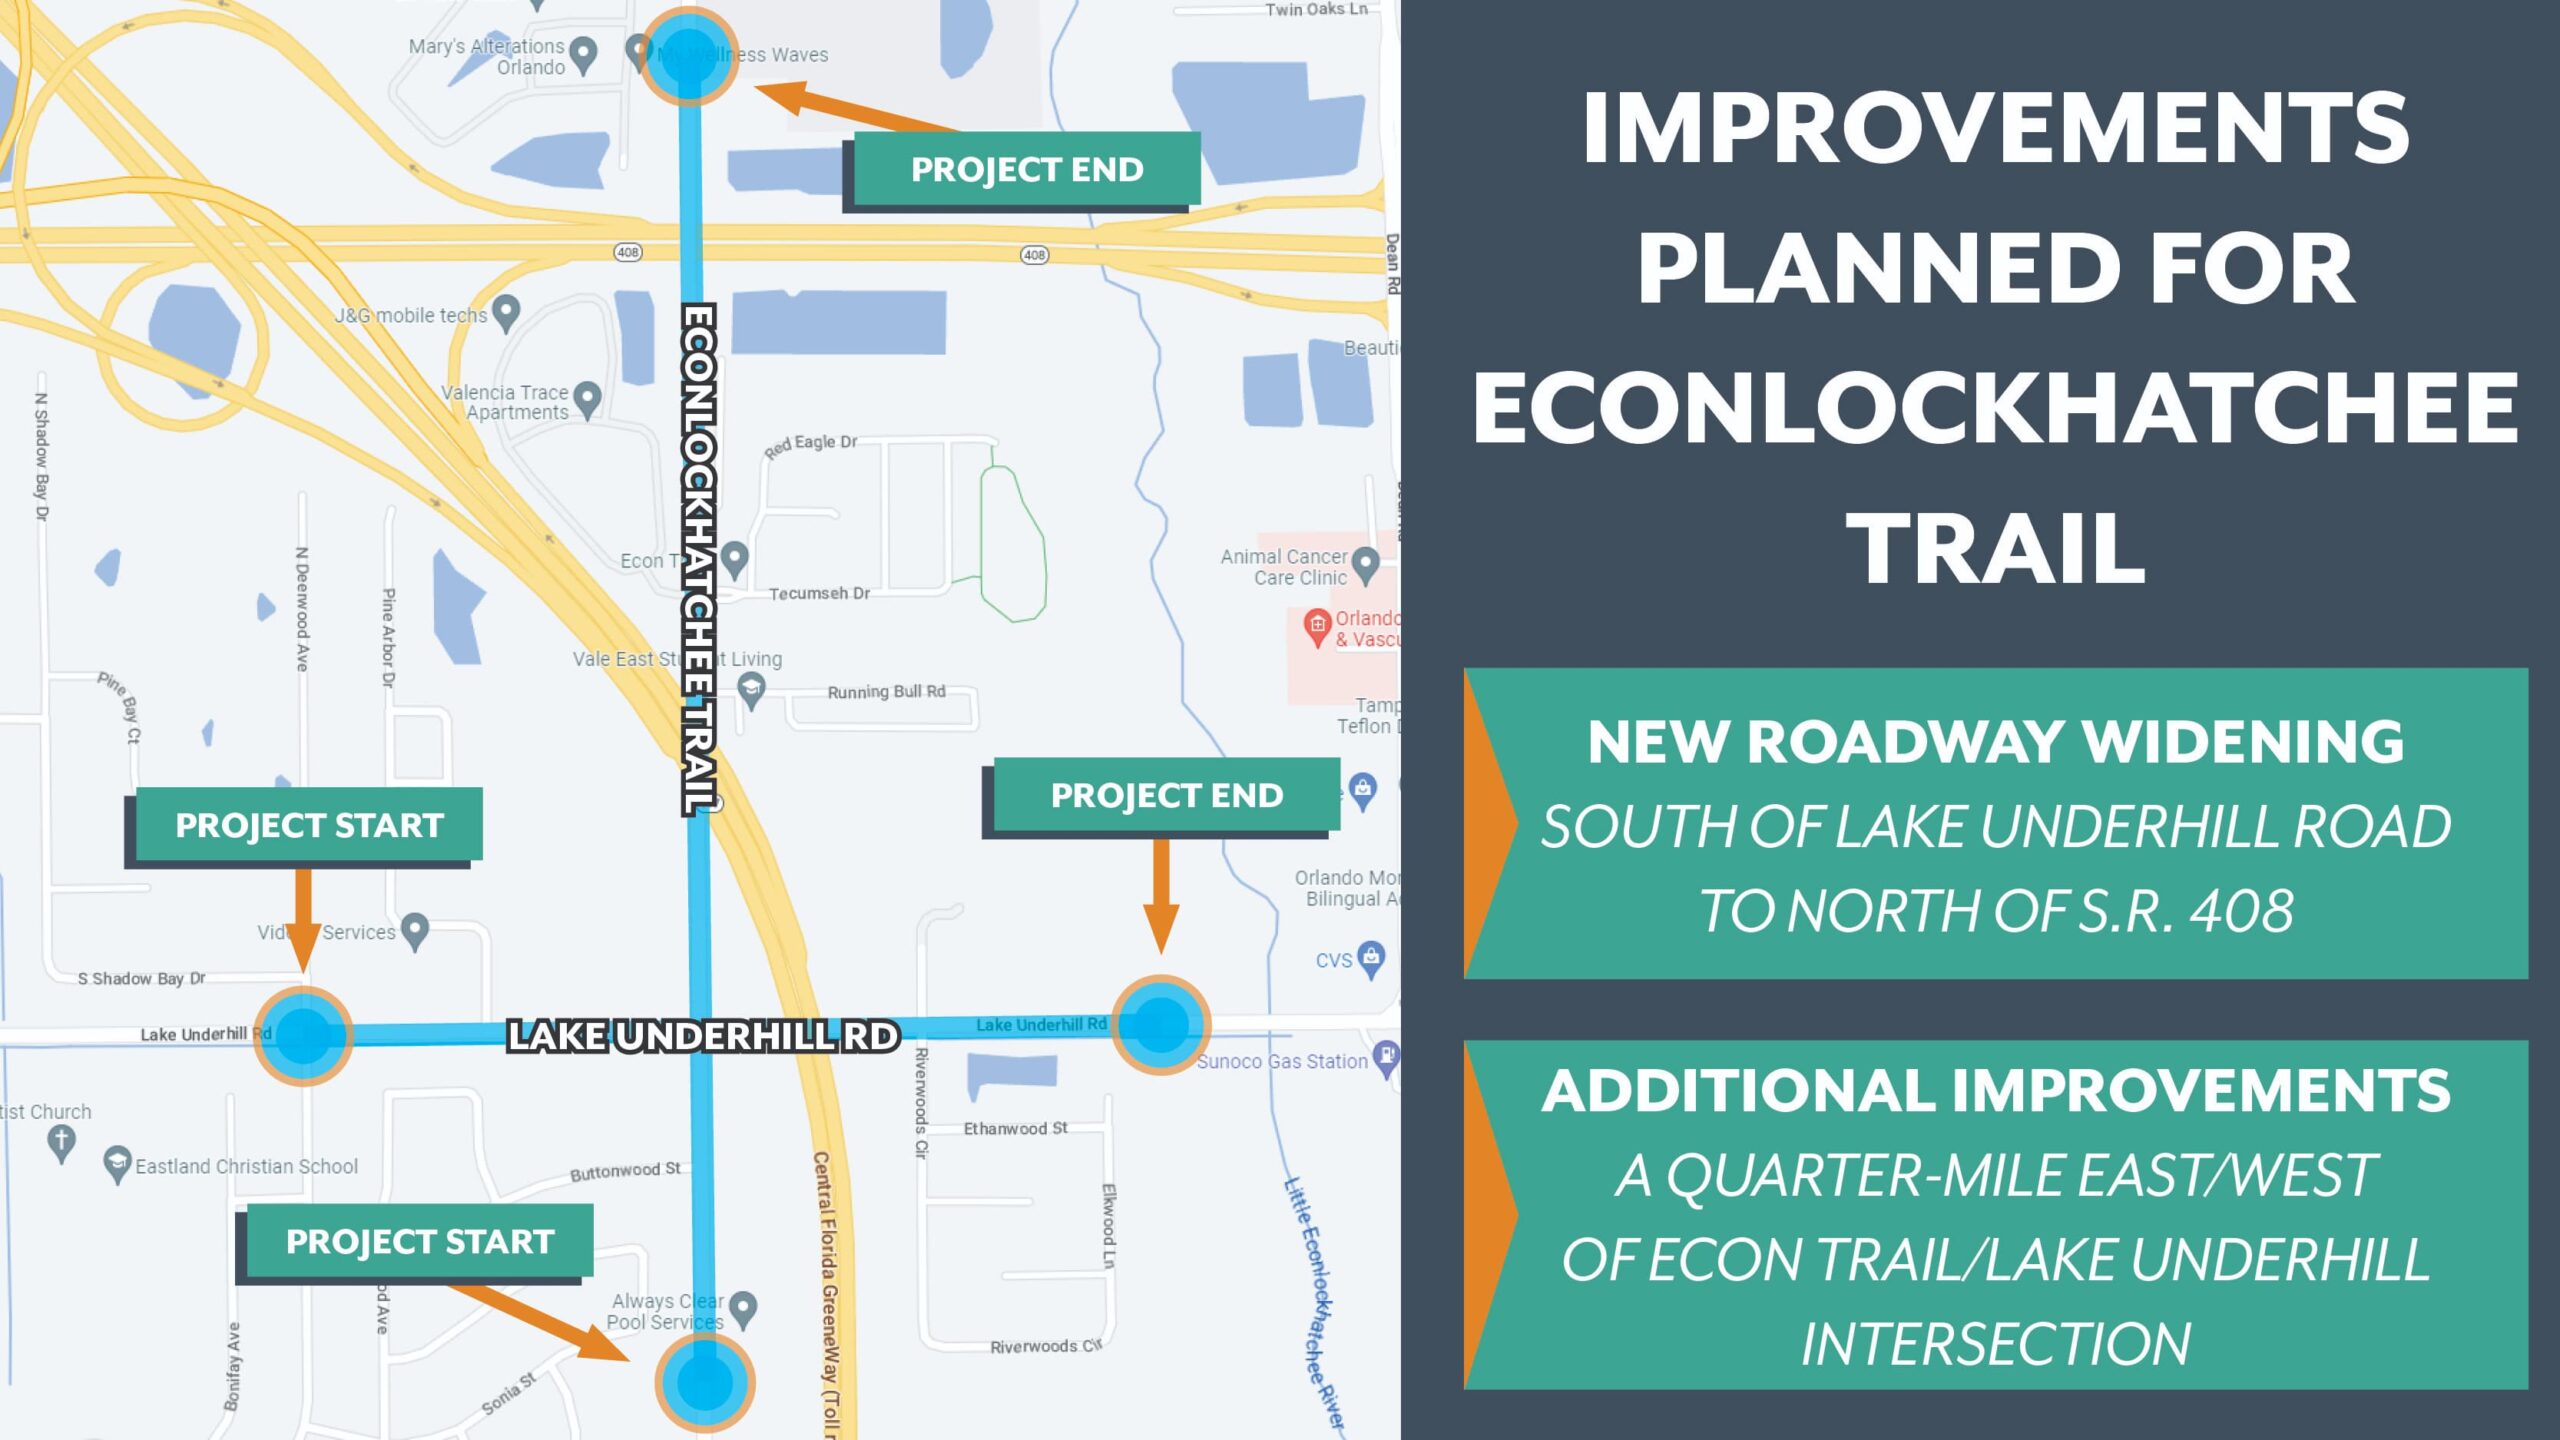 Improvements planned for Econlockhatchee Trail - New roadway widening south of Lake Underhill Road to north of S.R. 408 - Additional improvements a quarter-mile east and west of Econ Trail and Lake Underhill intersection